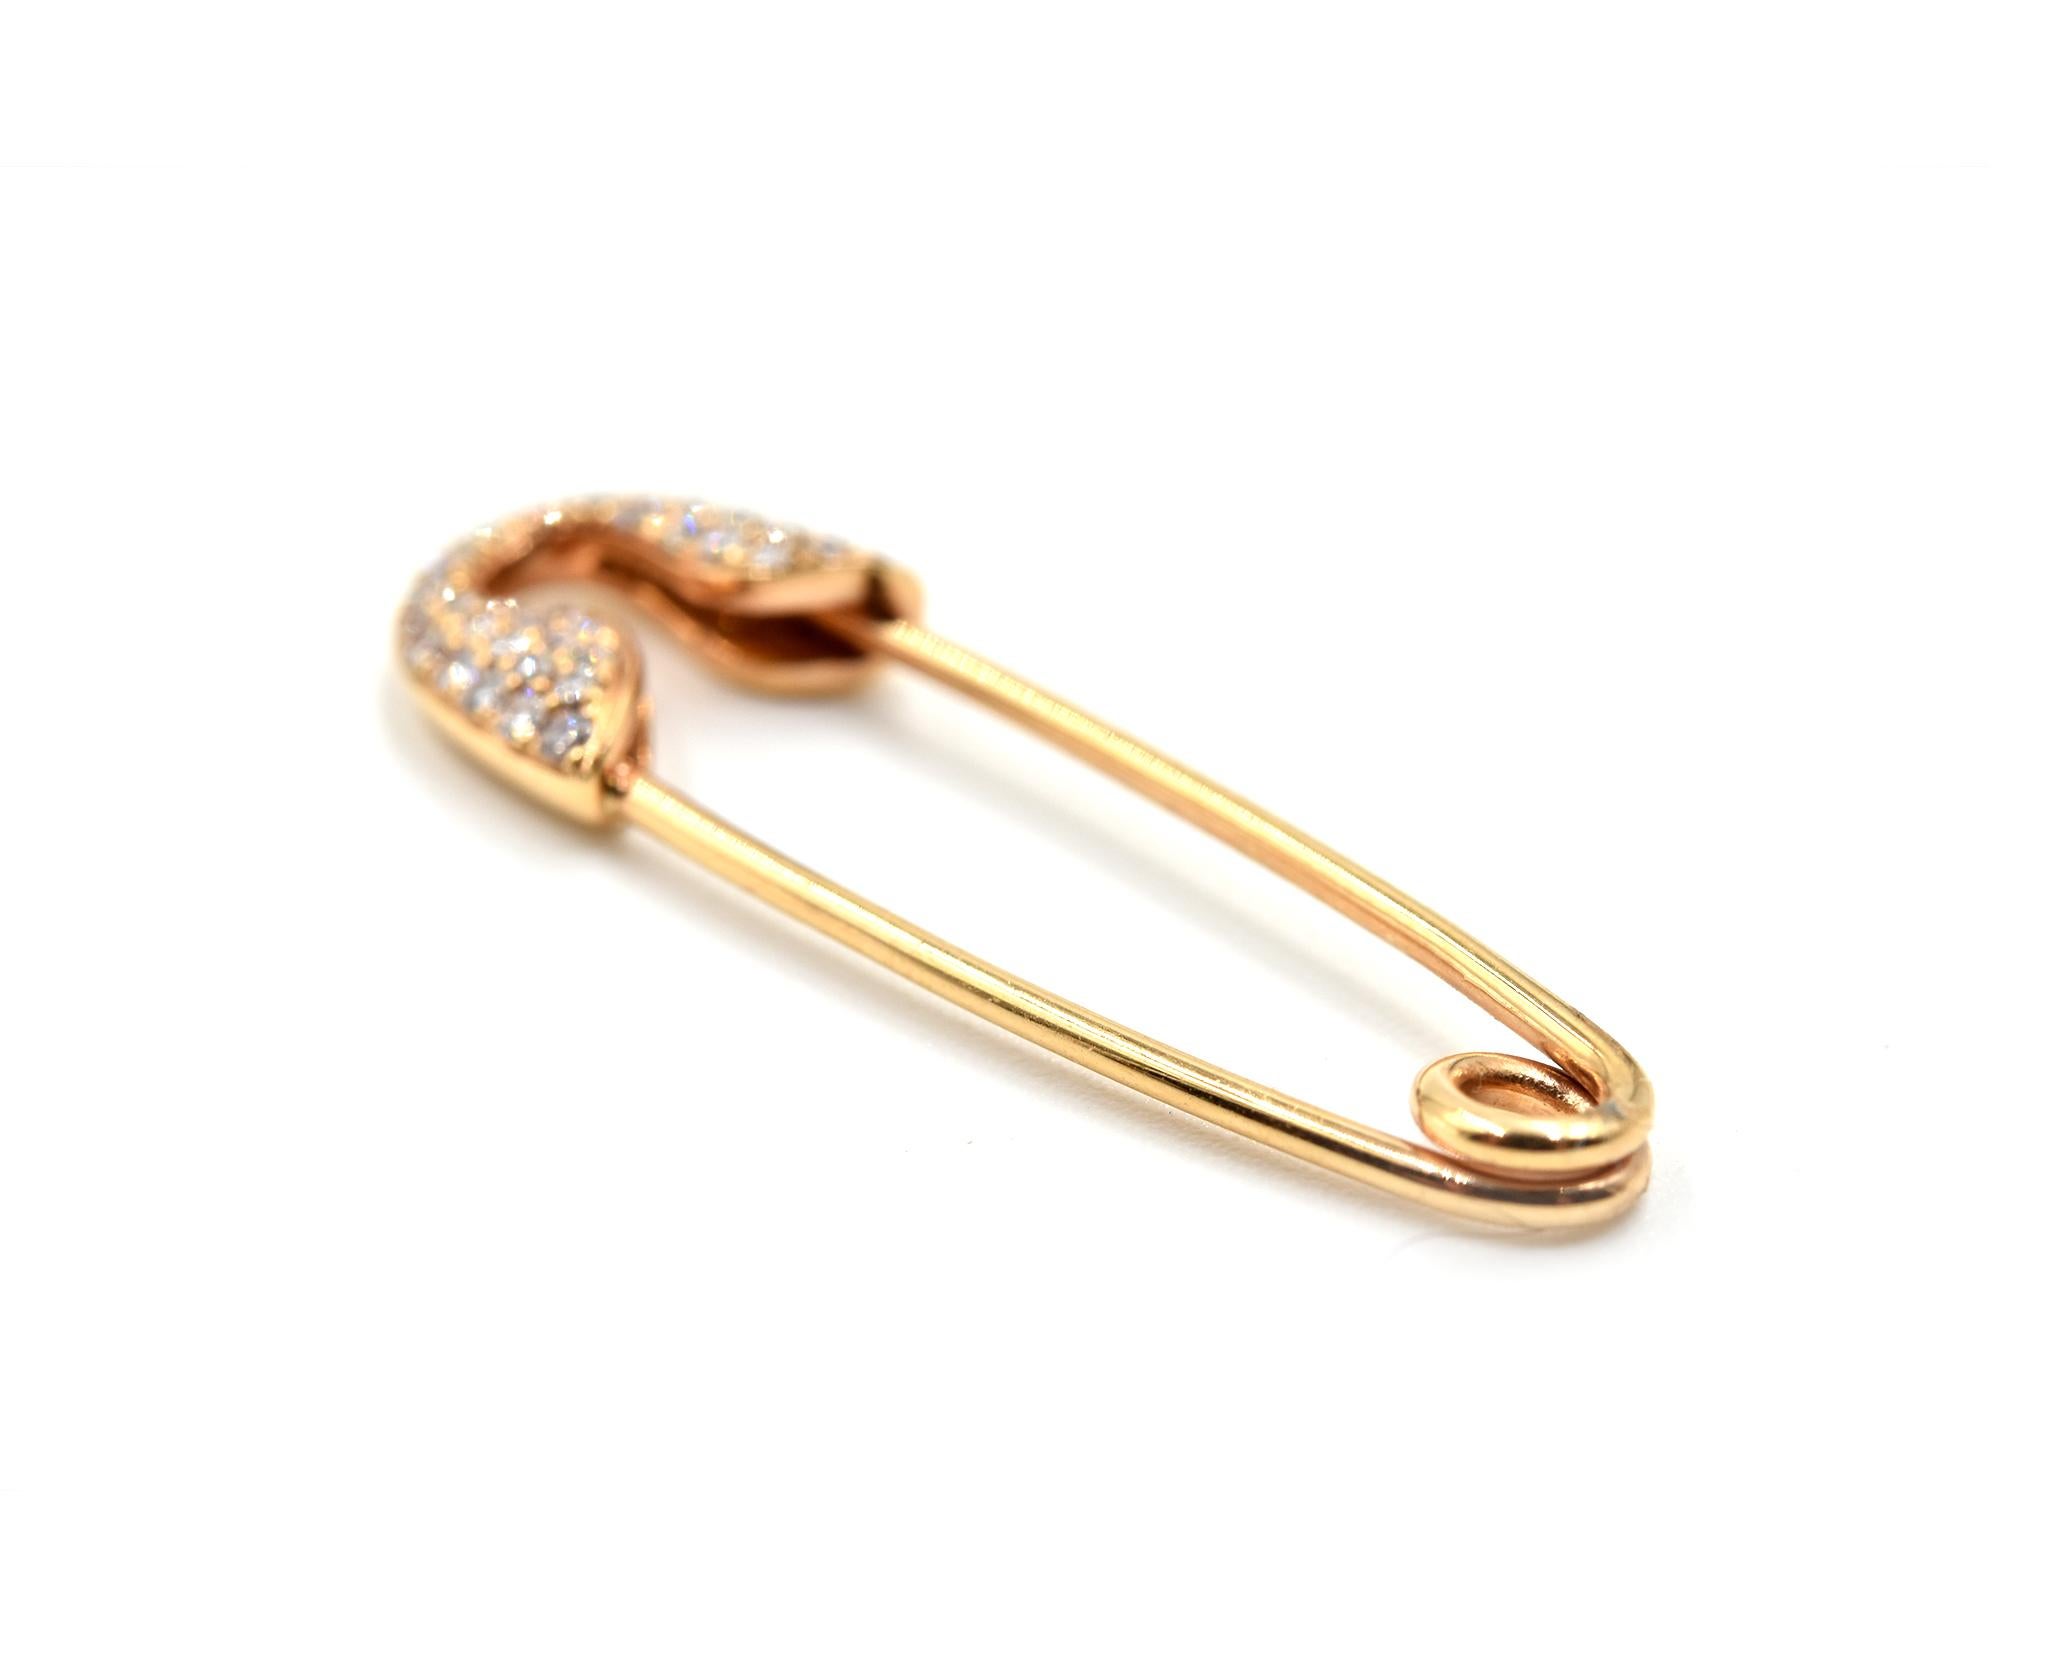 Designer: custom design
Material: 18k rose gold
Diamonds: 36 round brilliant cuts = 0.08 carat total weight
Color: H
Clarity: VS2
Dimensions: pendant measures 1 1/4-inch long x 3/8-inch wide
Weight: 1.6 grams
